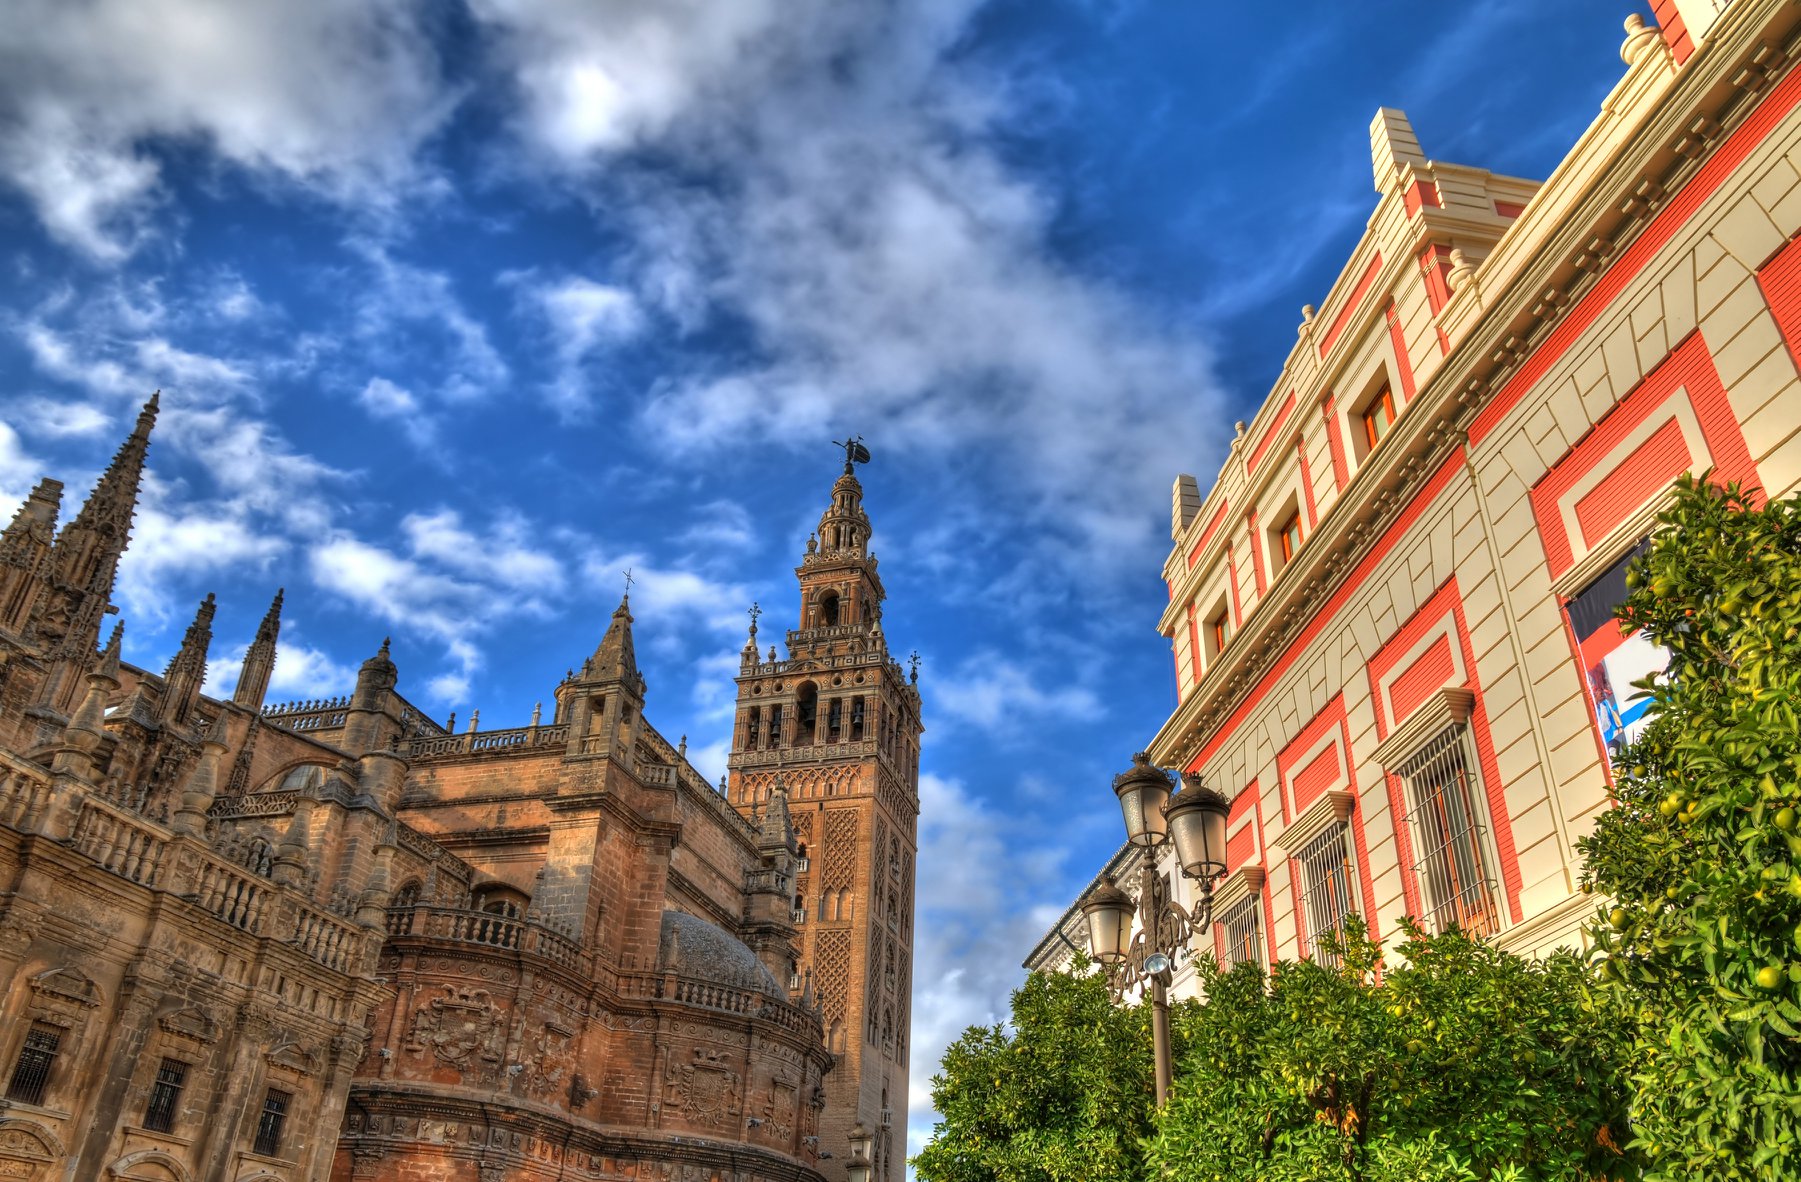 Spain's most iconic cathedral